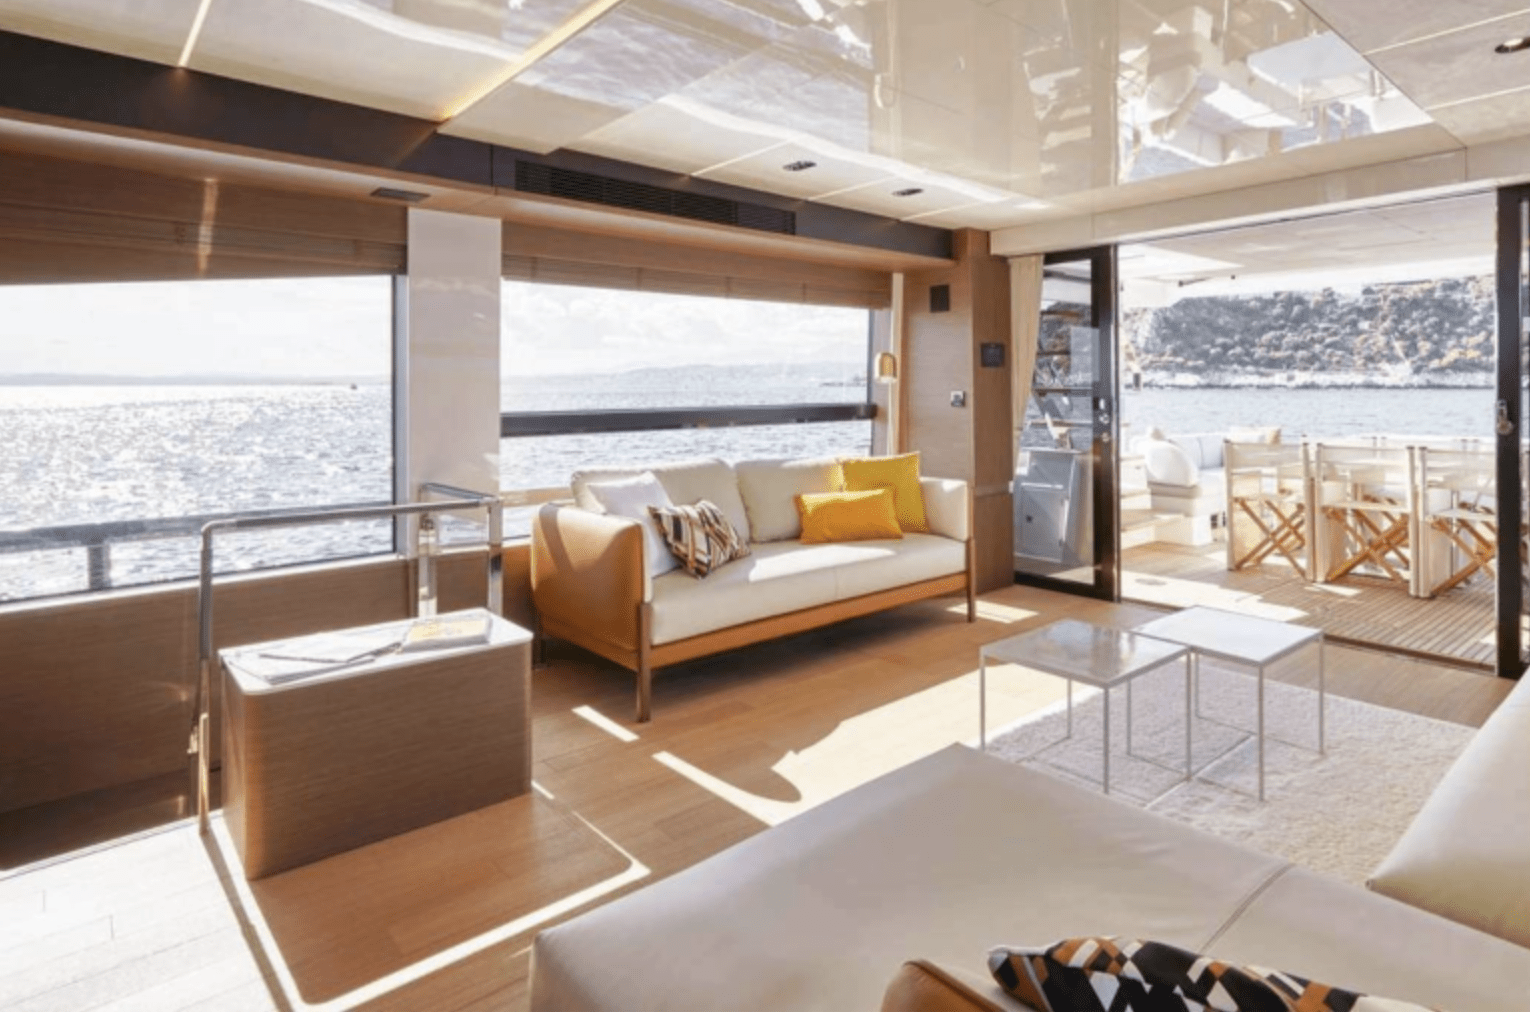 Roomy and homelike interior of a Prestige boat